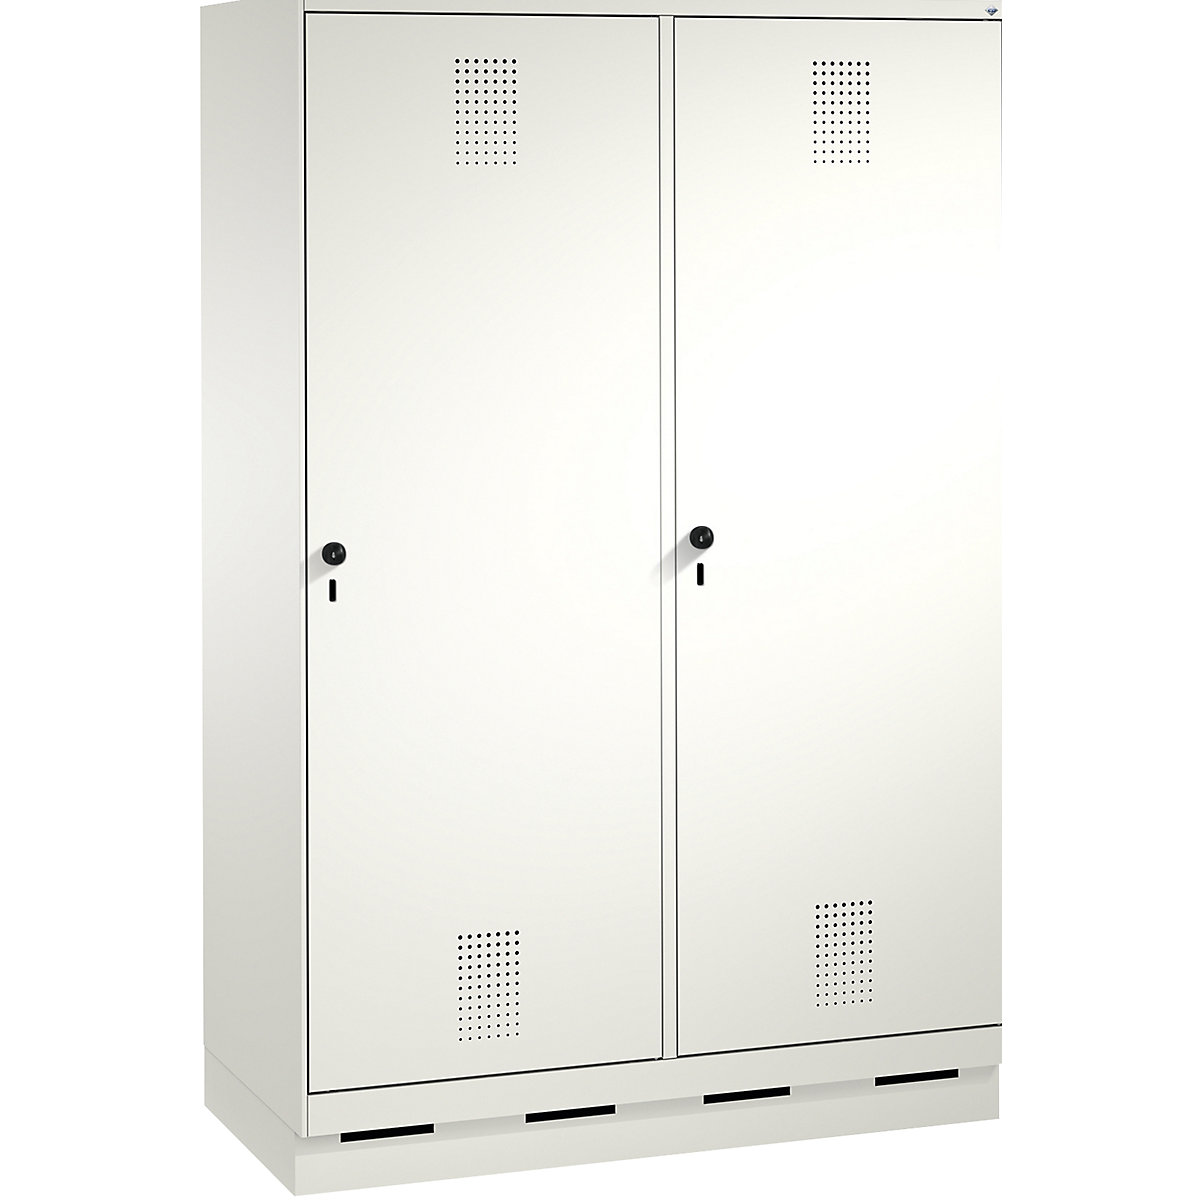 EVOLO cloakroom locker, door for 2 compartments, with plinth – C+P, 4 compartments, 2 doors, compartment width 300 mm, traffic white / traffic white-4